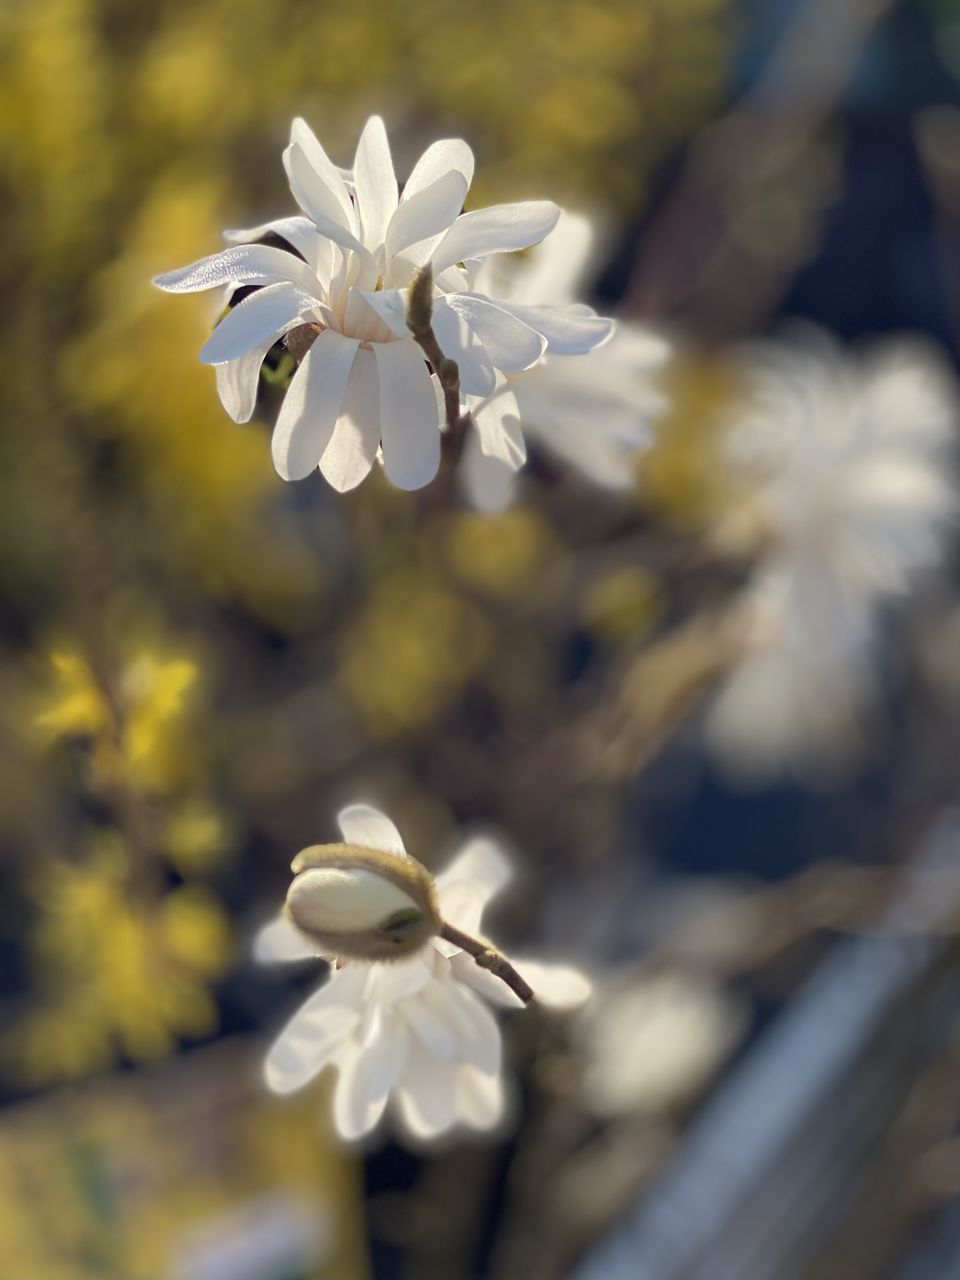 flower, flowering plant, plant, blossom, beauty in nature, freshness, fragility, close-up, nature, spring, white, macro photography, petal, flower head, focus on foreground, springtime, growth, inflorescence, no people, branch, wildflower, outdoors, selective focus, tree, day, botany, sunlight